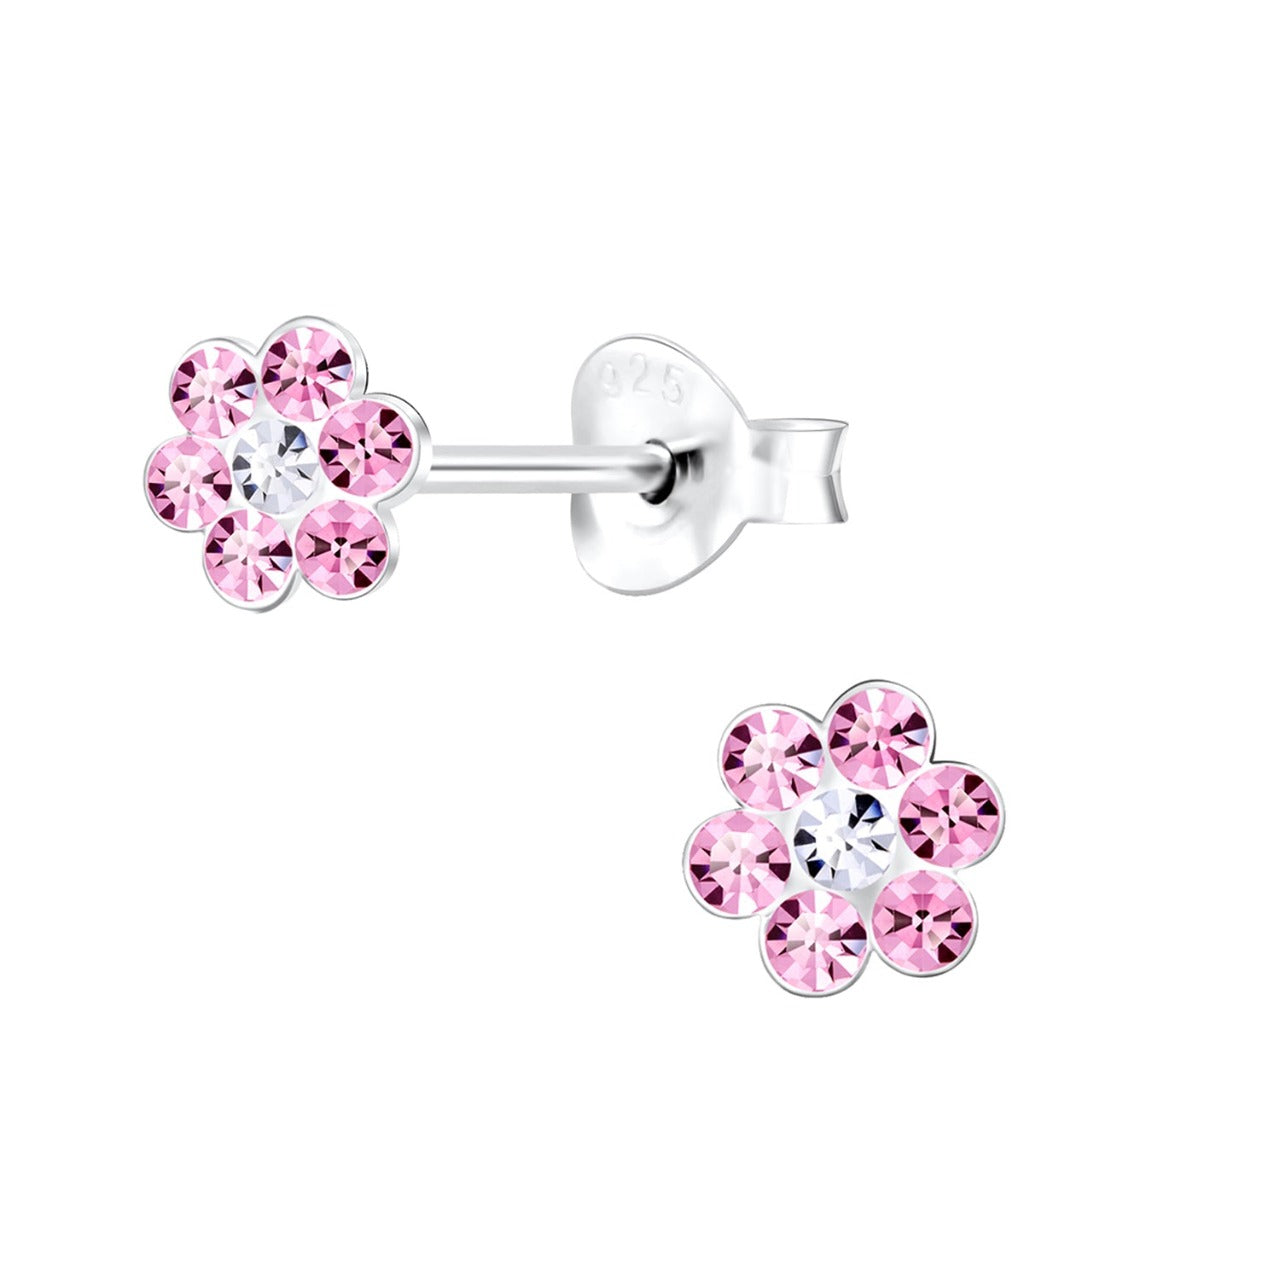 Kilkenny Silver Kids Crystal Flower Stud Earrings - Pink  Sterling silver crystal stud earrings with many colours to choose from.  These stunning earrings are a great finishing touch for your girl's daily fashionable outfit.